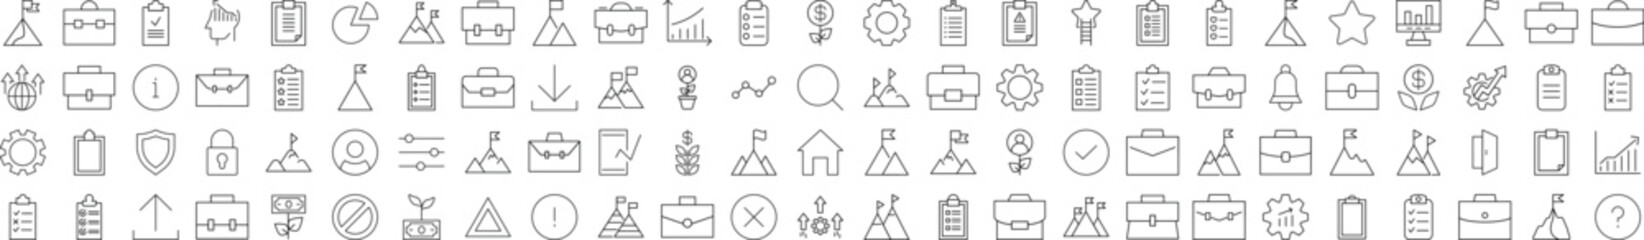 Business Outline Linear Icons of Thin Line. Illustrations for web sites, apps, design, banners and other purposes